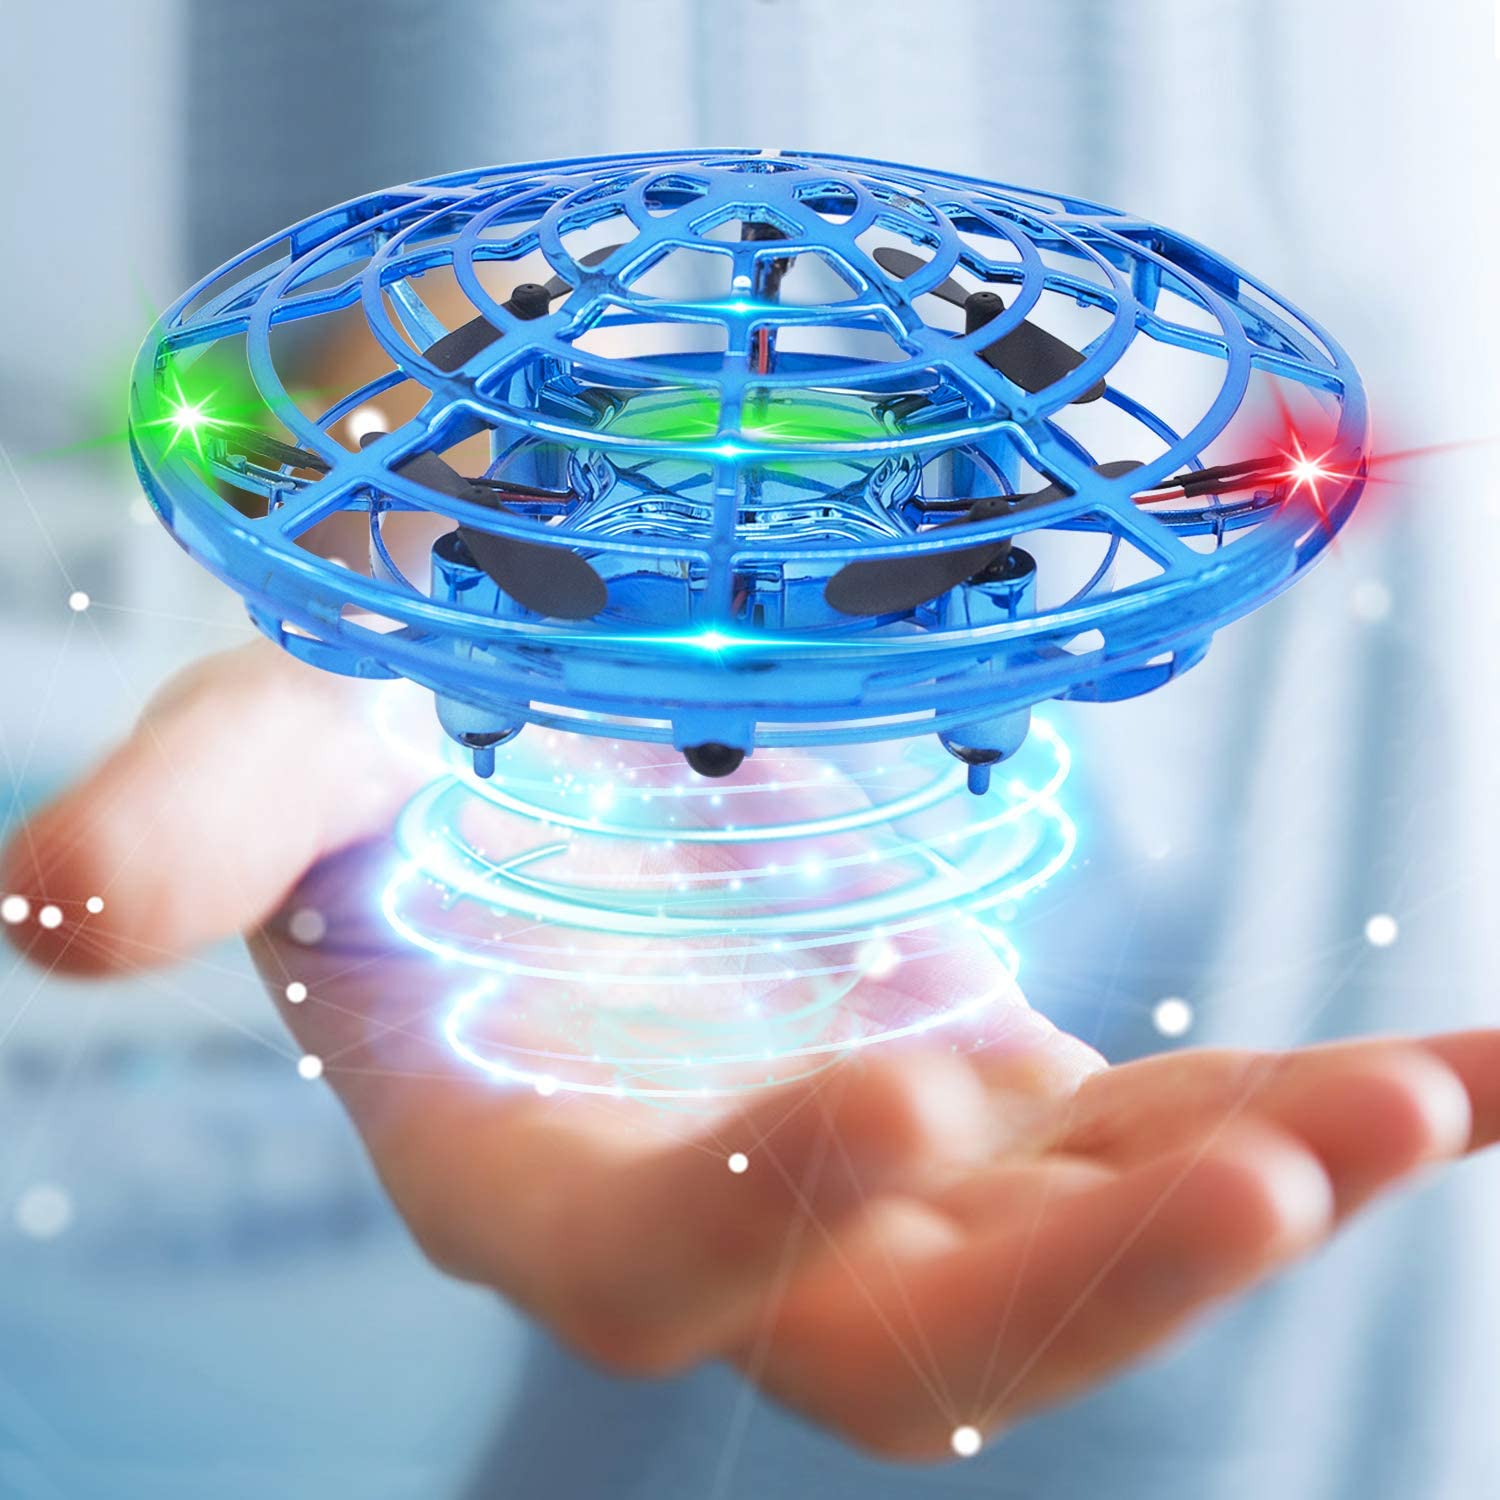 Podfly™ Infrared Induction Flying Ball